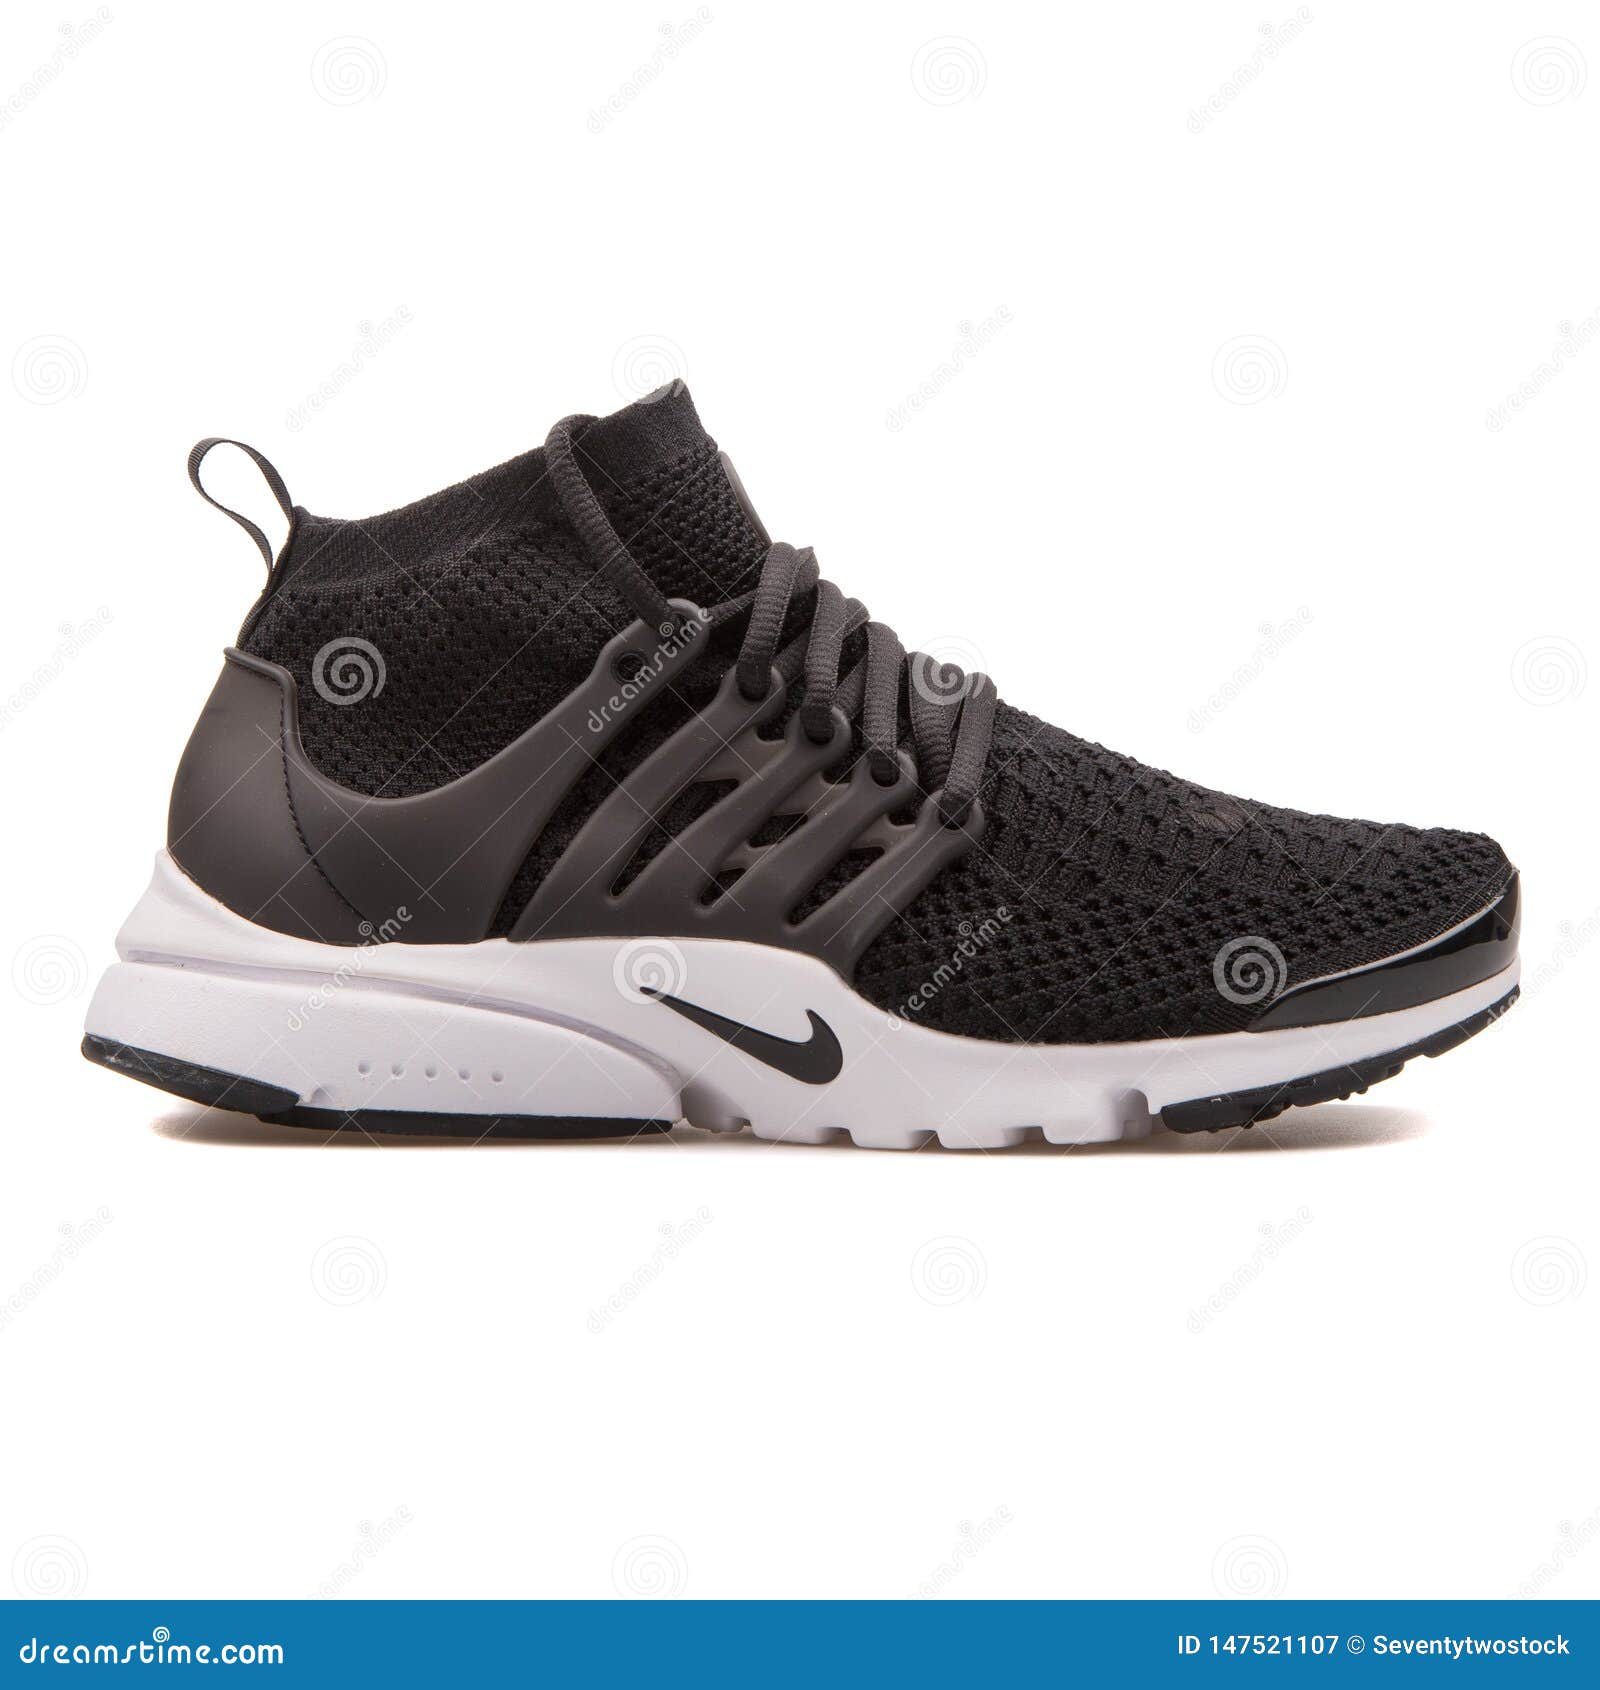 Nike Air Presto Flyknit Ultra Black and Sneaker Editorial Photography - Image of presto, flyknit: 147521107